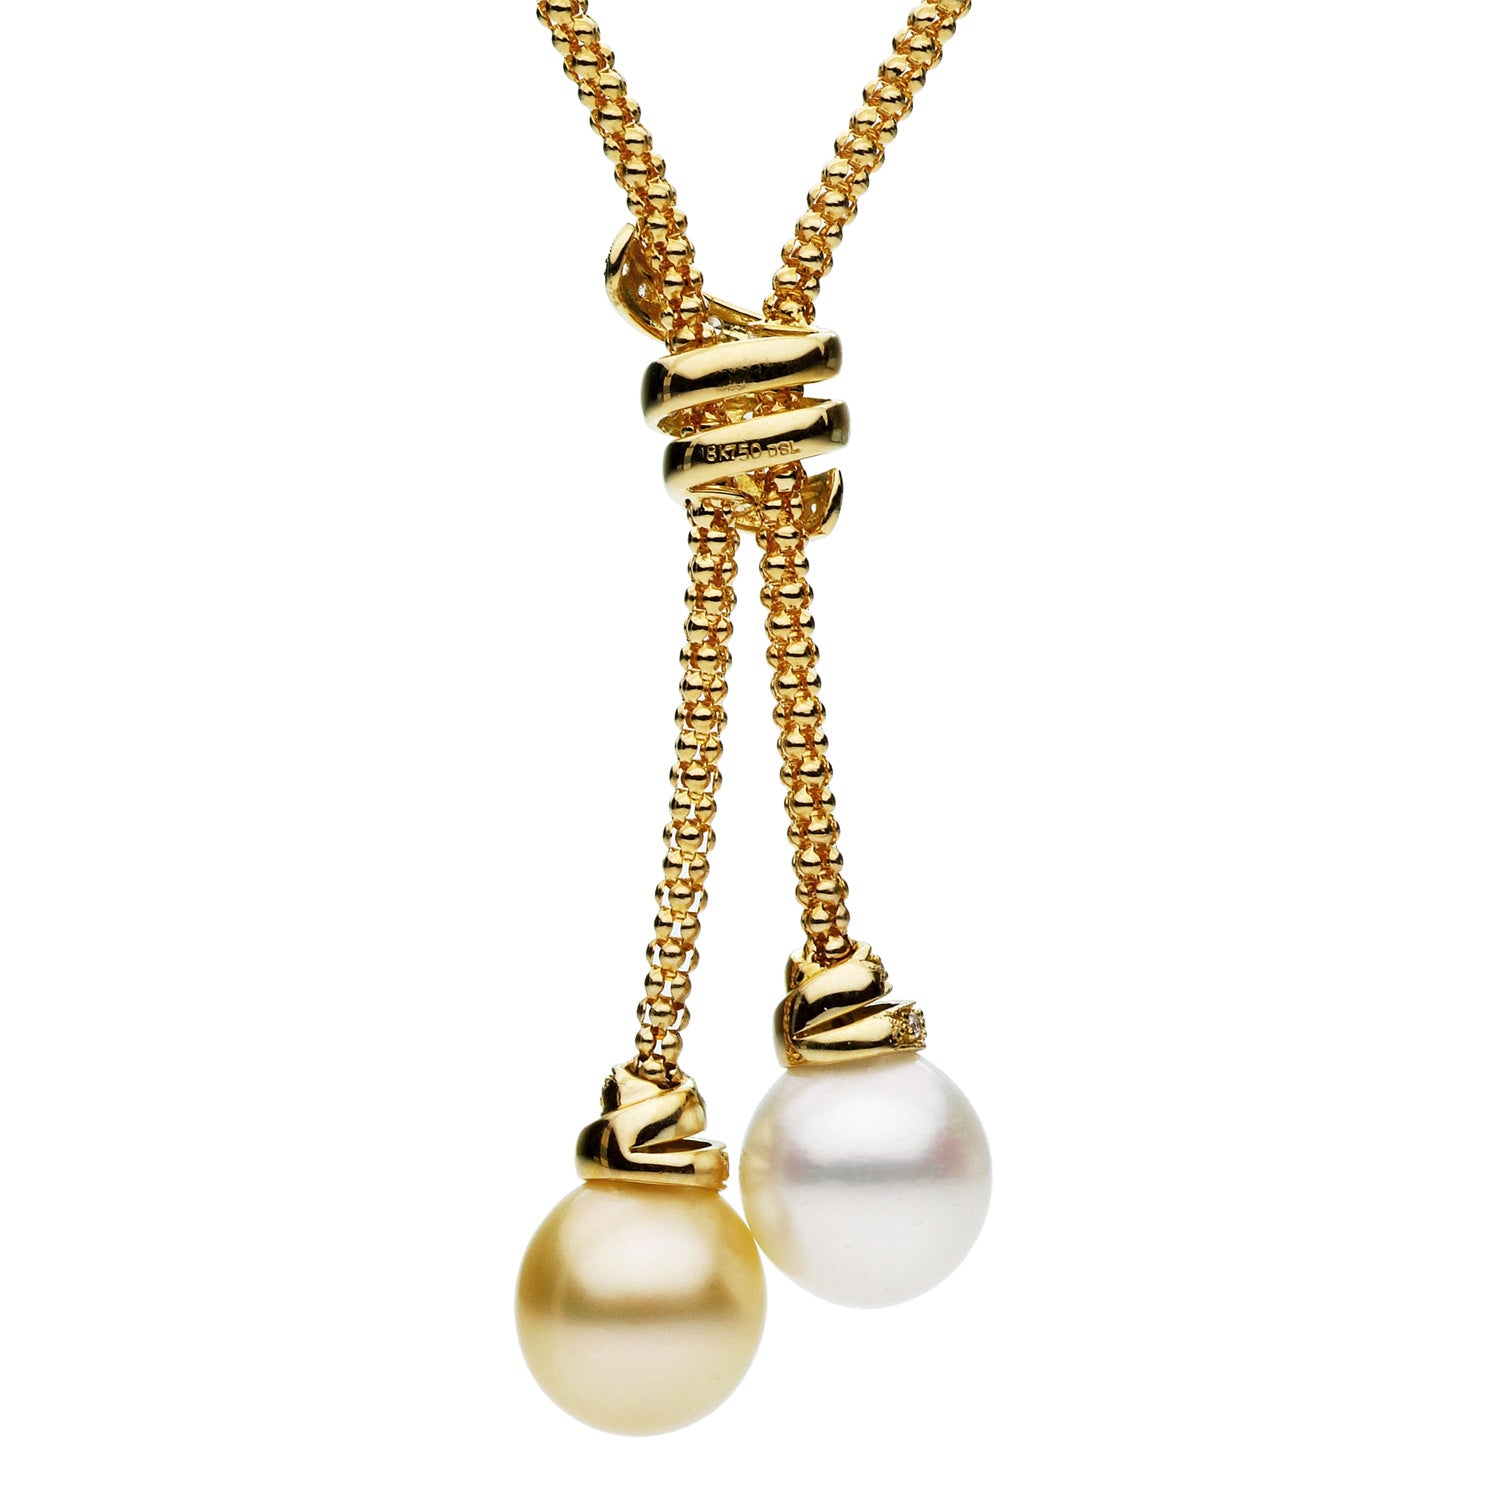 18KY White & Golden South Sea Pearl Necklace, 12-13mm